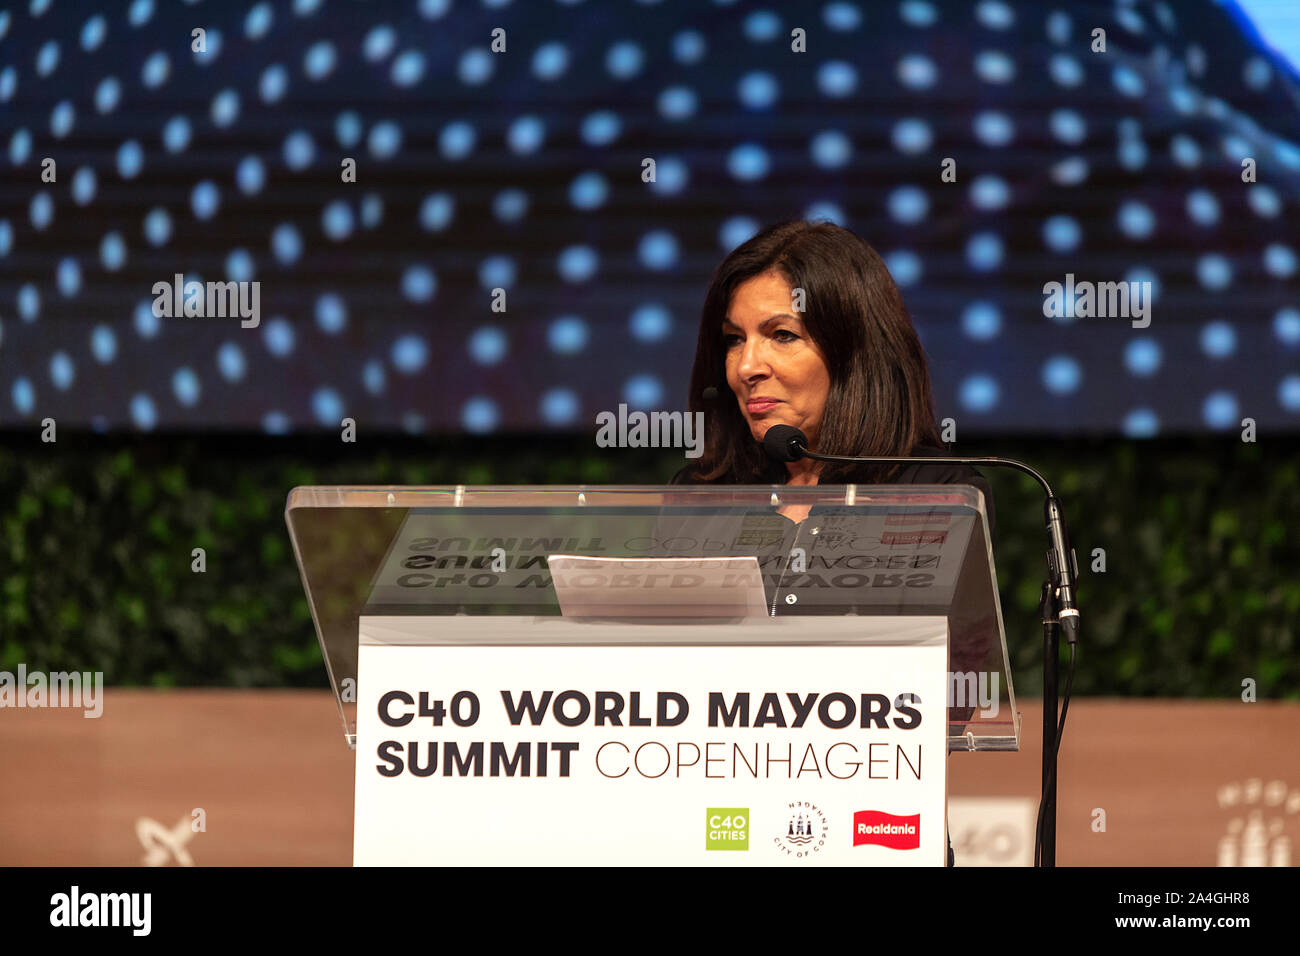 COPENHAGEN, DENMARK -  OCTOBER 10, 2019: Anne Hidalgo, Mayor of Paris and Chair of the C40, during her hand-over speech of the Chair to Eric Garcetti, Mayor of Los Angeles, at the C40 World Mayors Summit 2019 in Copenhagen. More than 70 mayors of some of the world’s largest and most influential cities representing some 700 million people meet in Copenhagen from October 9-12 for the C40 World Mayors Summit. The purpose with the summit in Copenhagen is to build a global coalition of leading cities, businesses and citizens that rallies around radical and ambitious climate action. Also youth leade Stock Photo